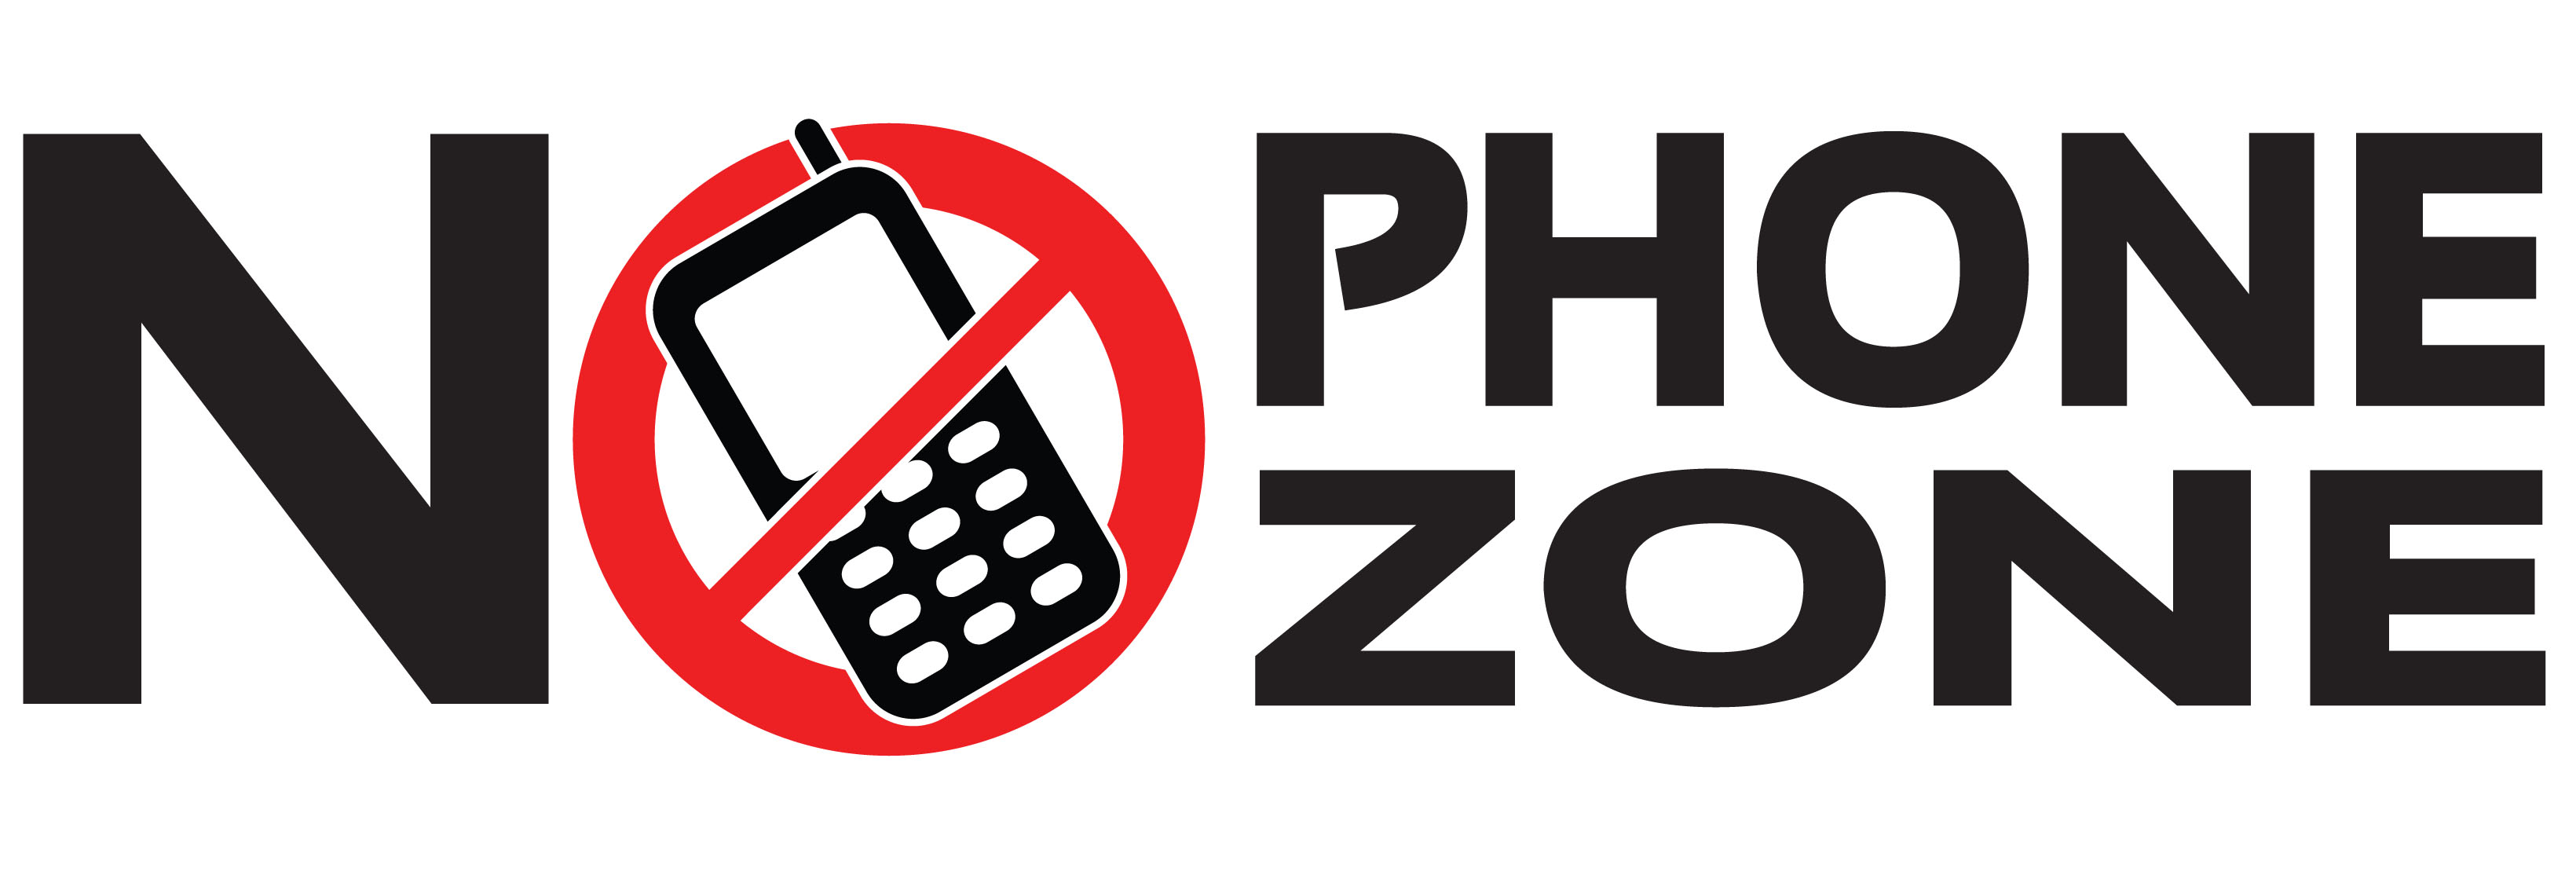 No cell phone zone clip art